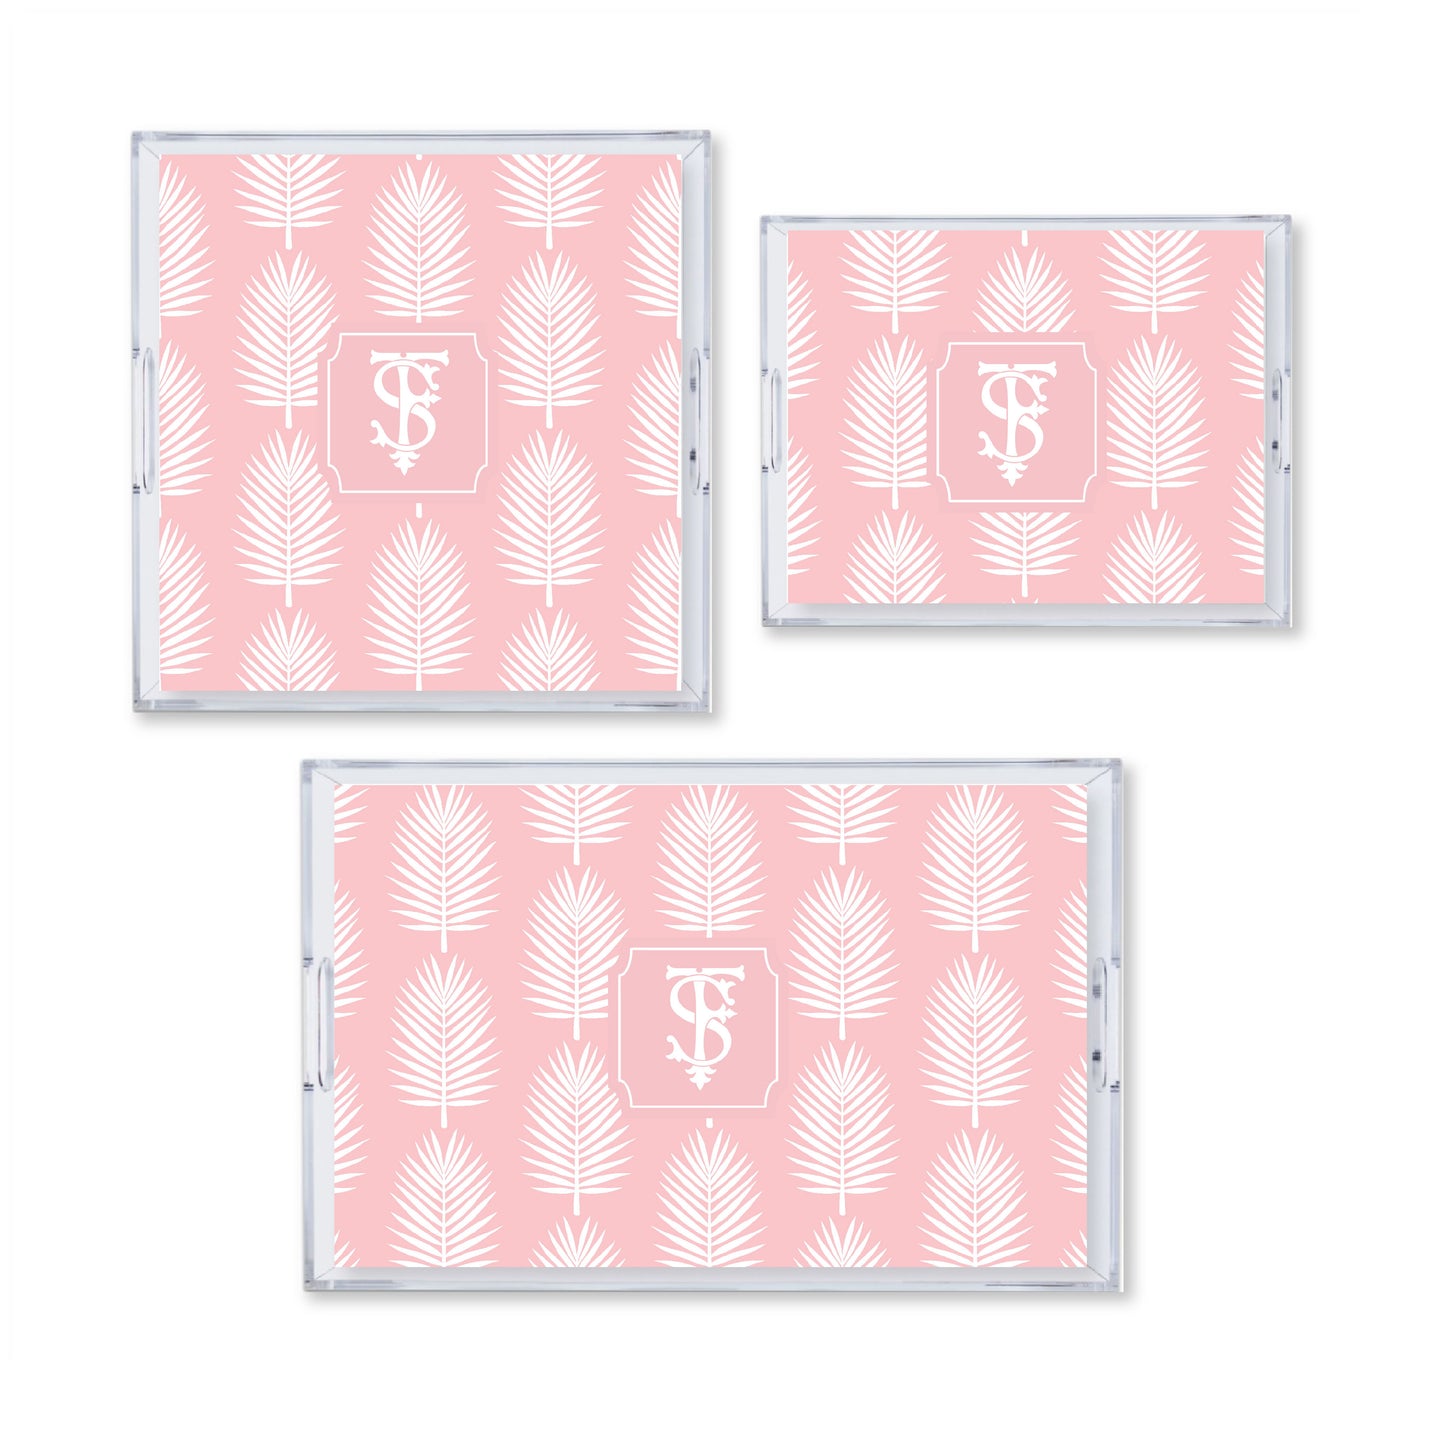 Cabbage Bay Reversible Acrylic Tray With Optional Monogram - Available In 3 Sizes and 3 Colors